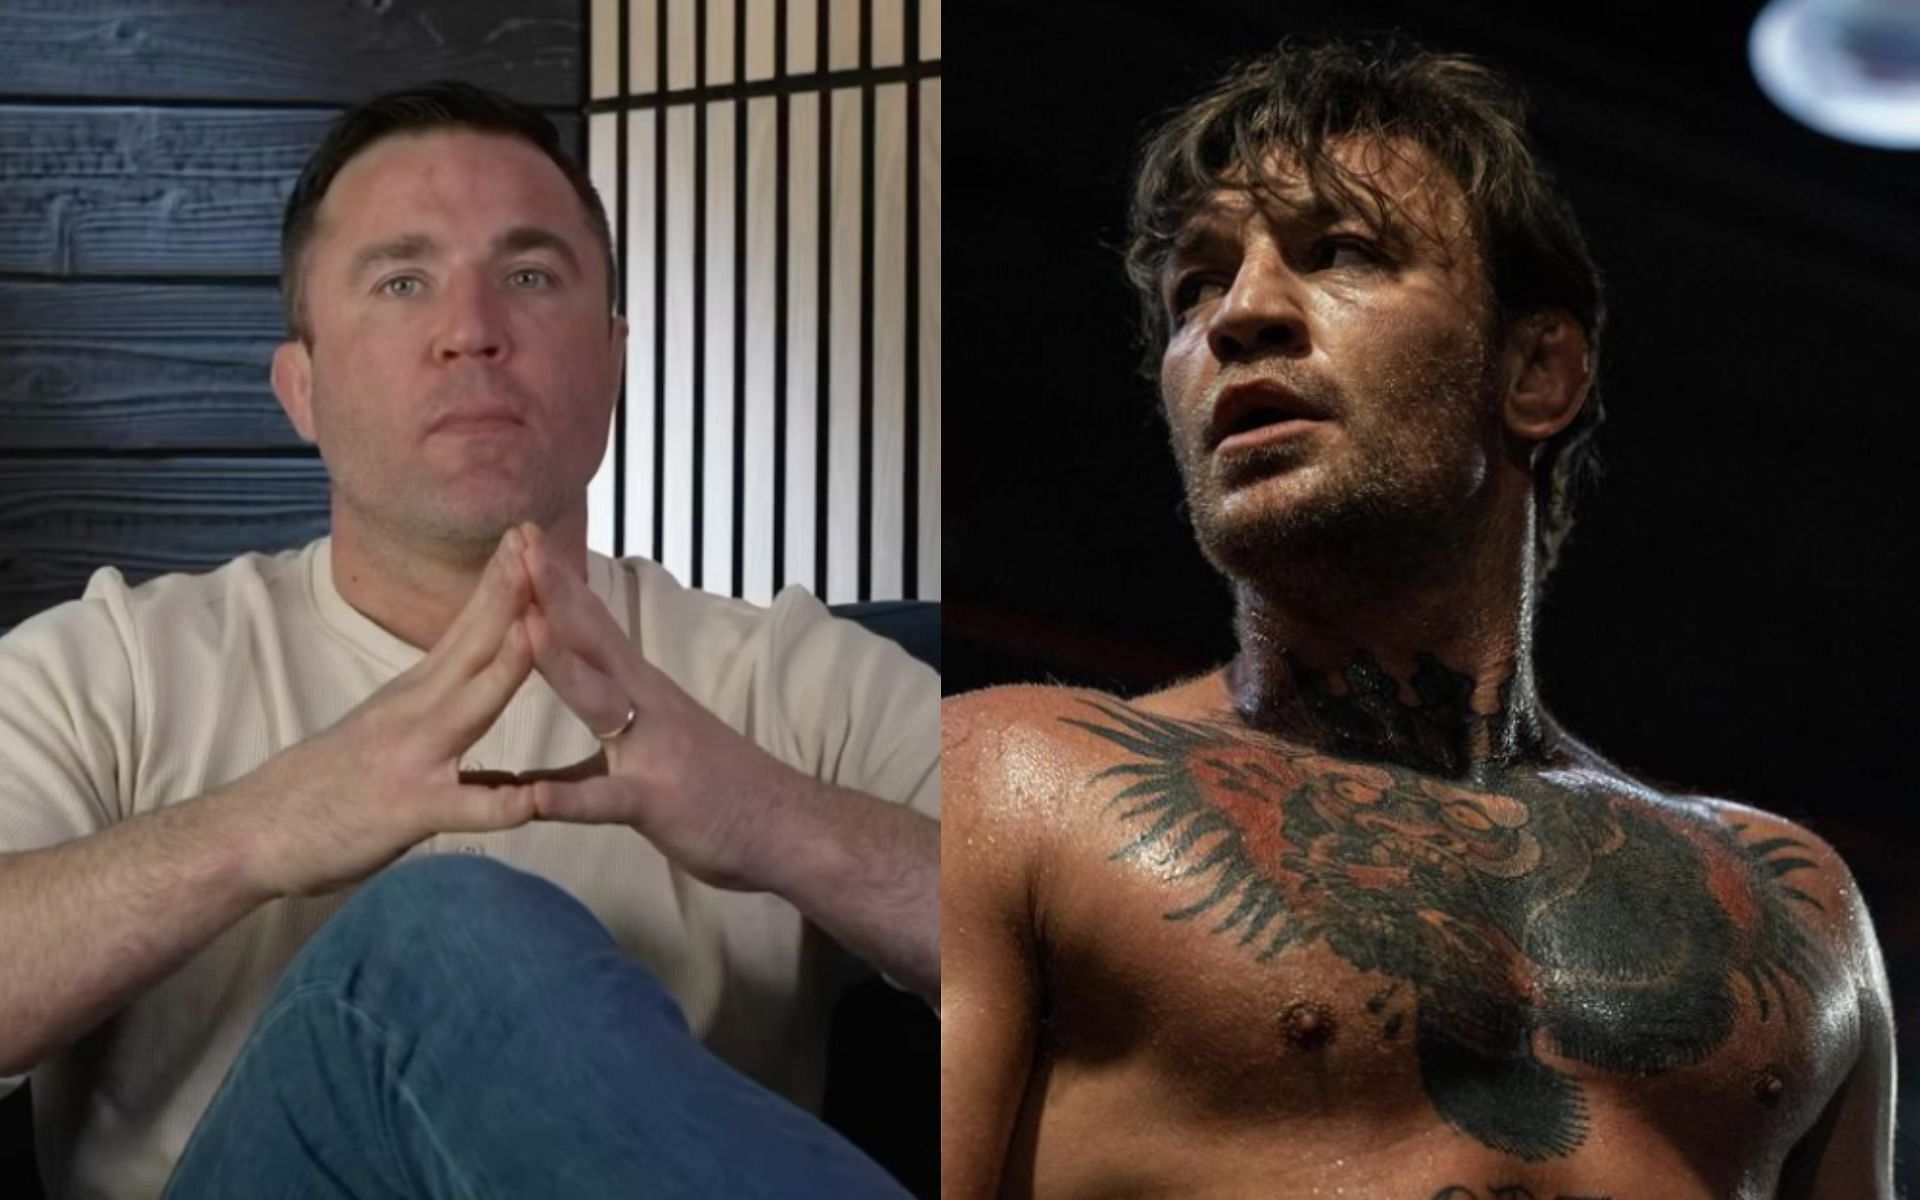 Chael Sonne (left) reacts to Conor McGregor